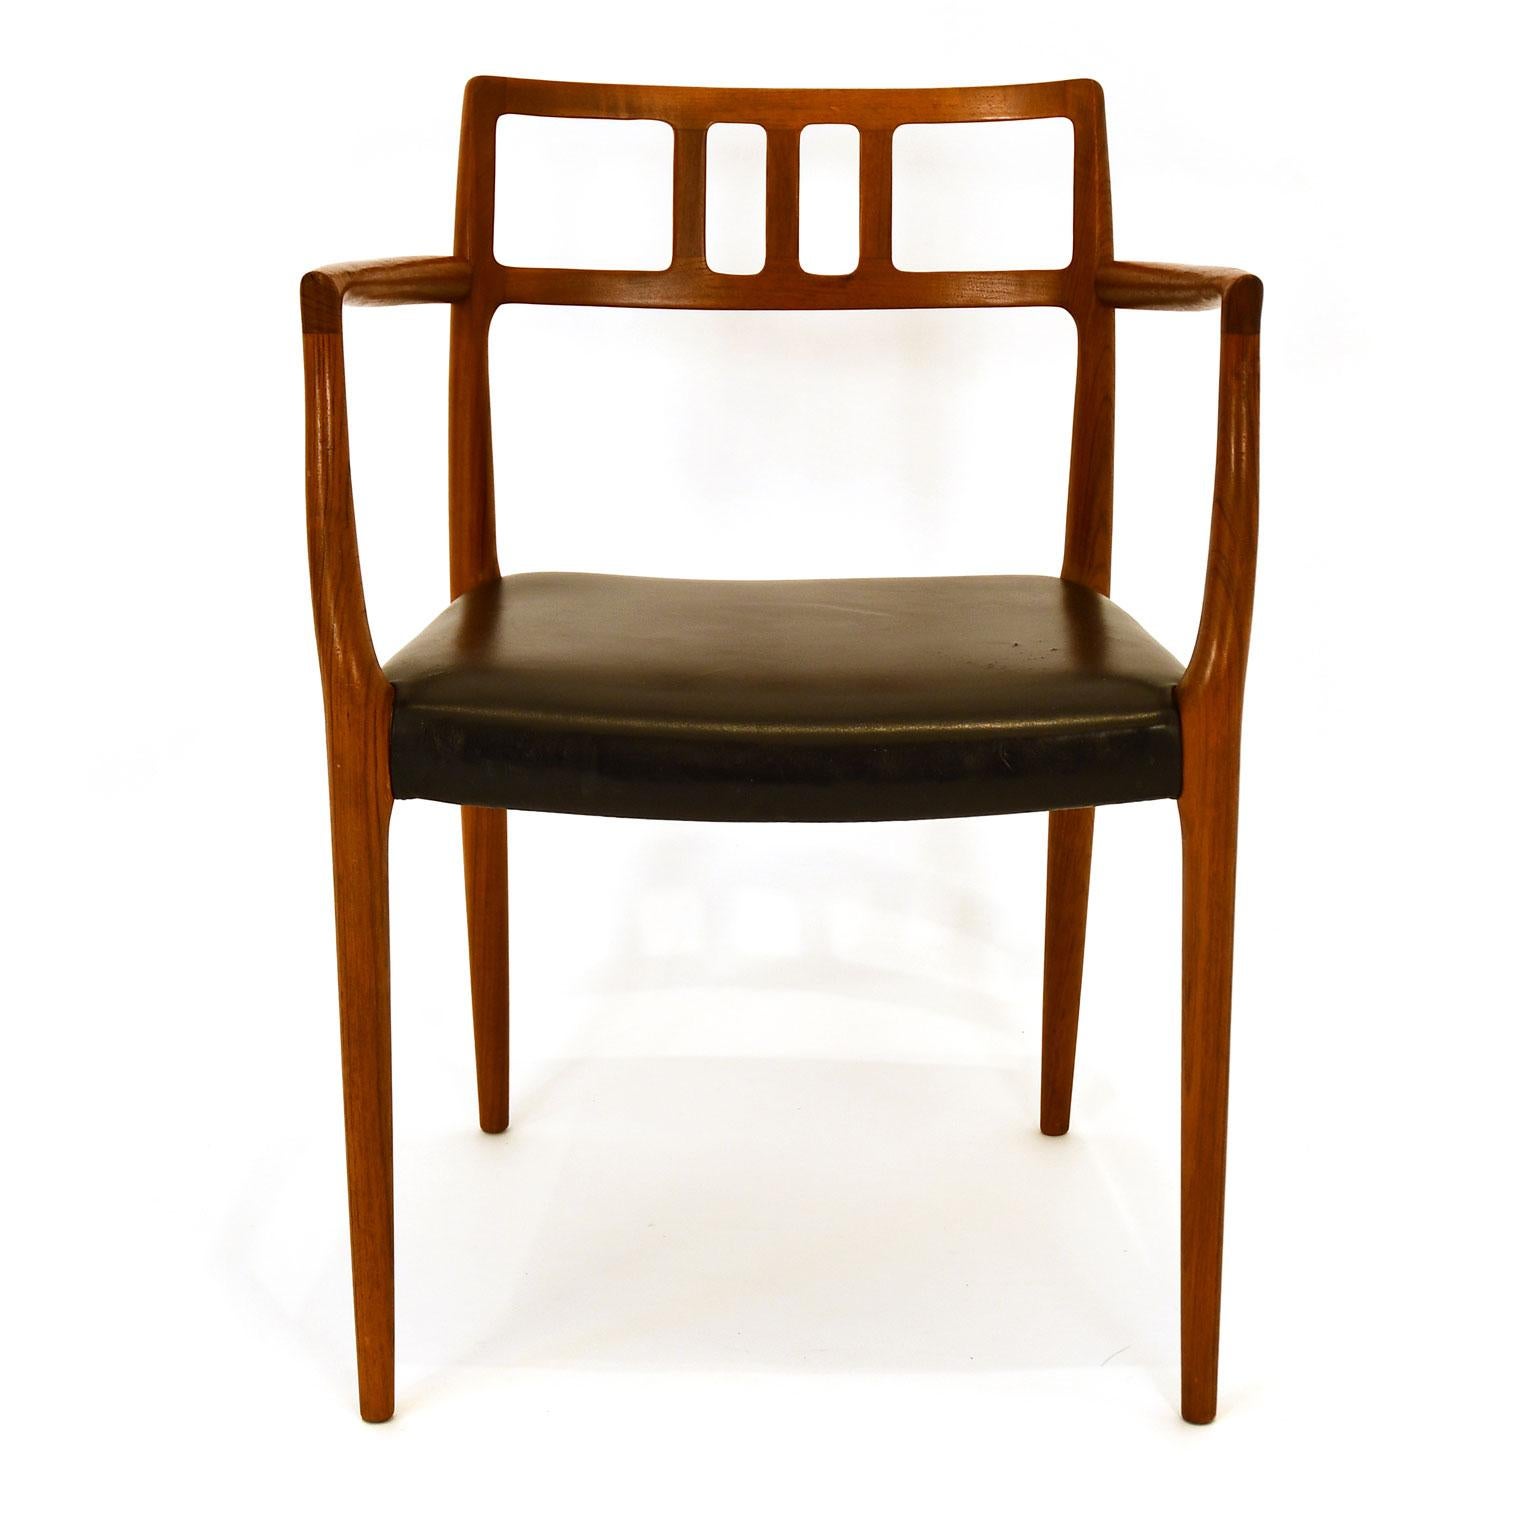 Niels Moller Teakwood model 64 armchair, designed in 1966 by Niels Moller and produced by his own company: J.L. Moller Mobelfabrik in Denmark. The frame has been professionally restored by our workshop and the seat is in the original condition. The